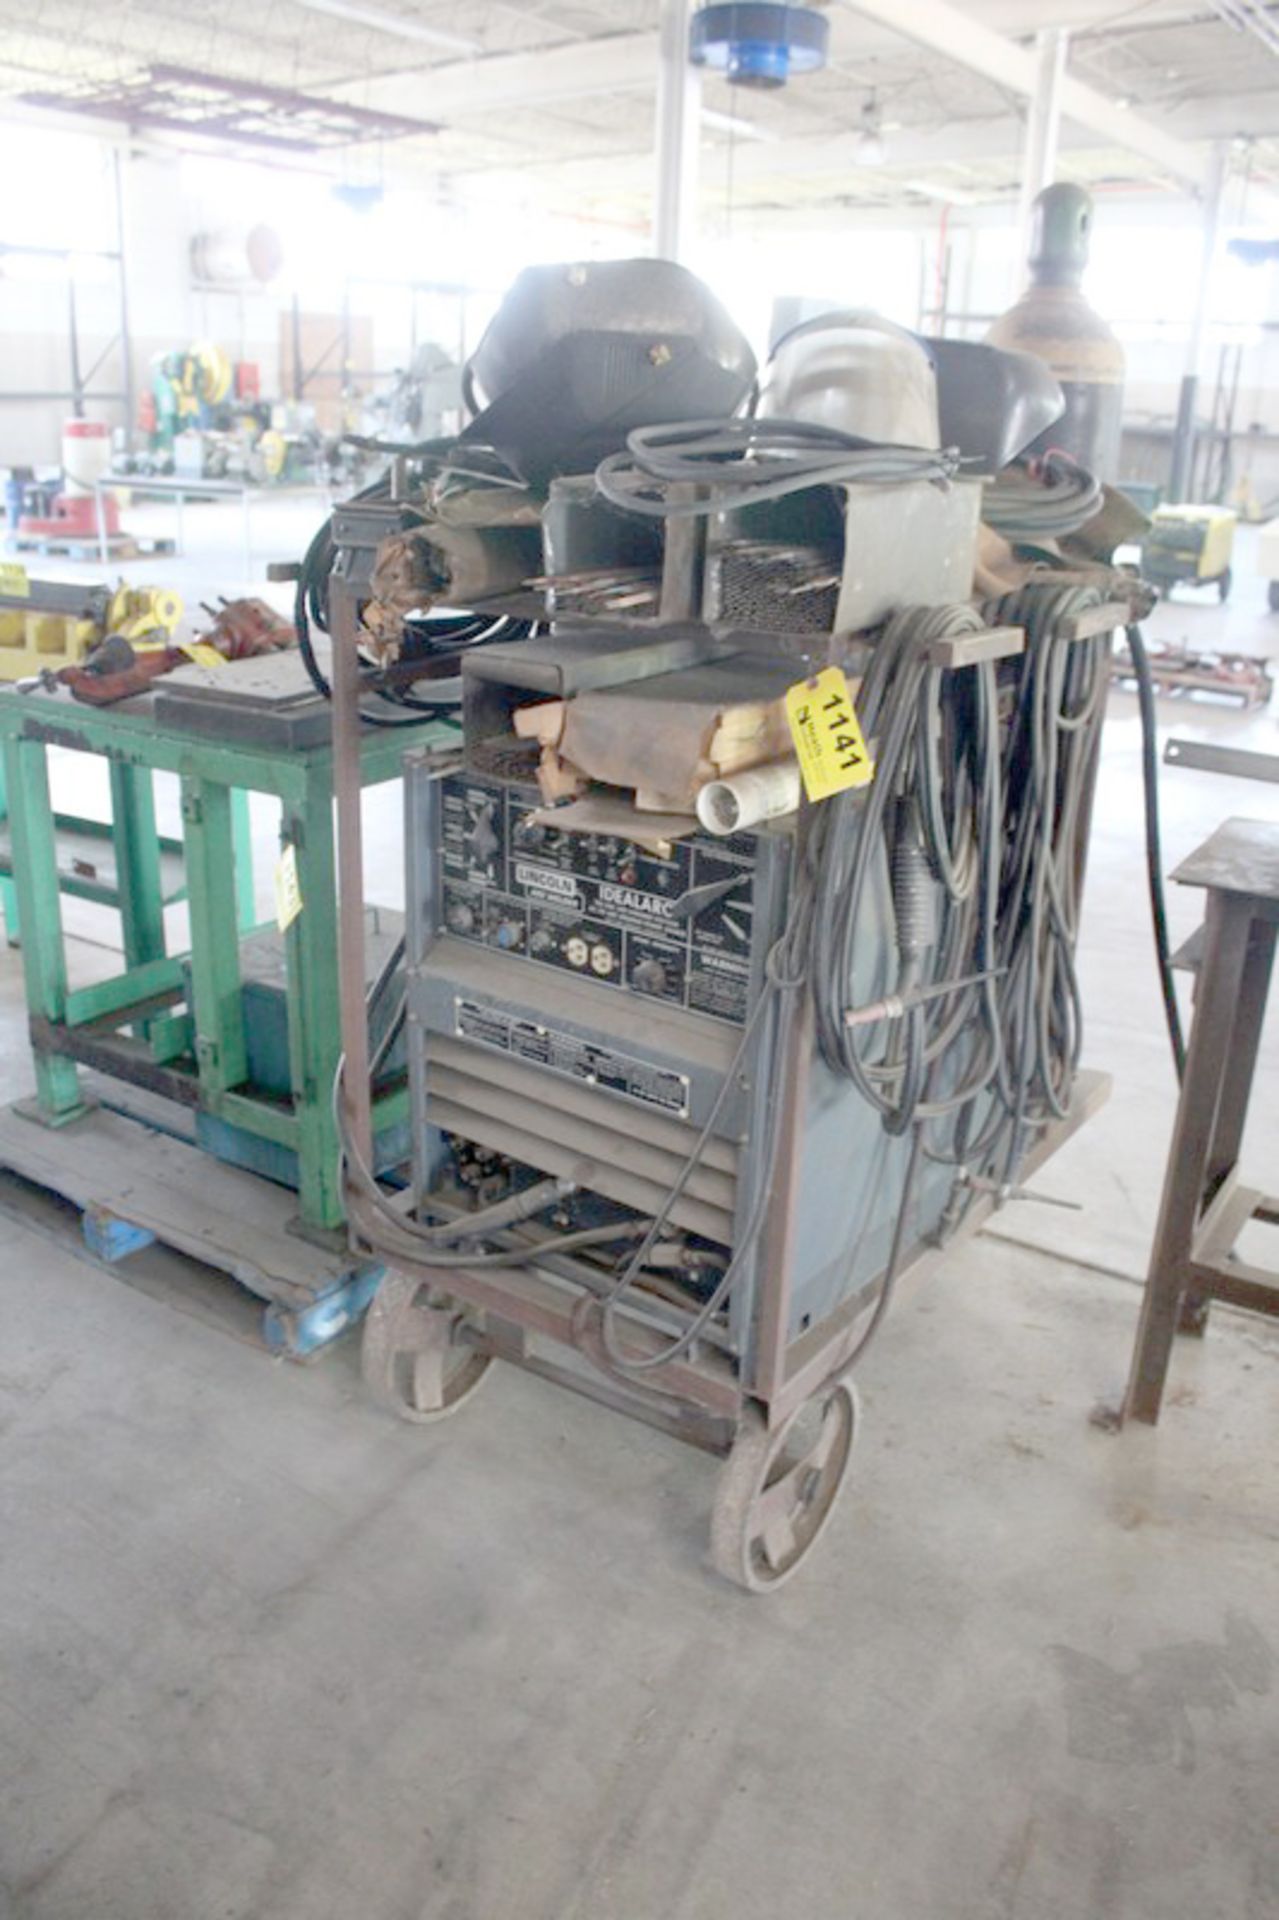 LINCOLN 300 AMP MODEL TIG300/300 WELDER, S/N AC-606130, WITH MOBILE CART, ALL RELATED HOSES, CABLES,